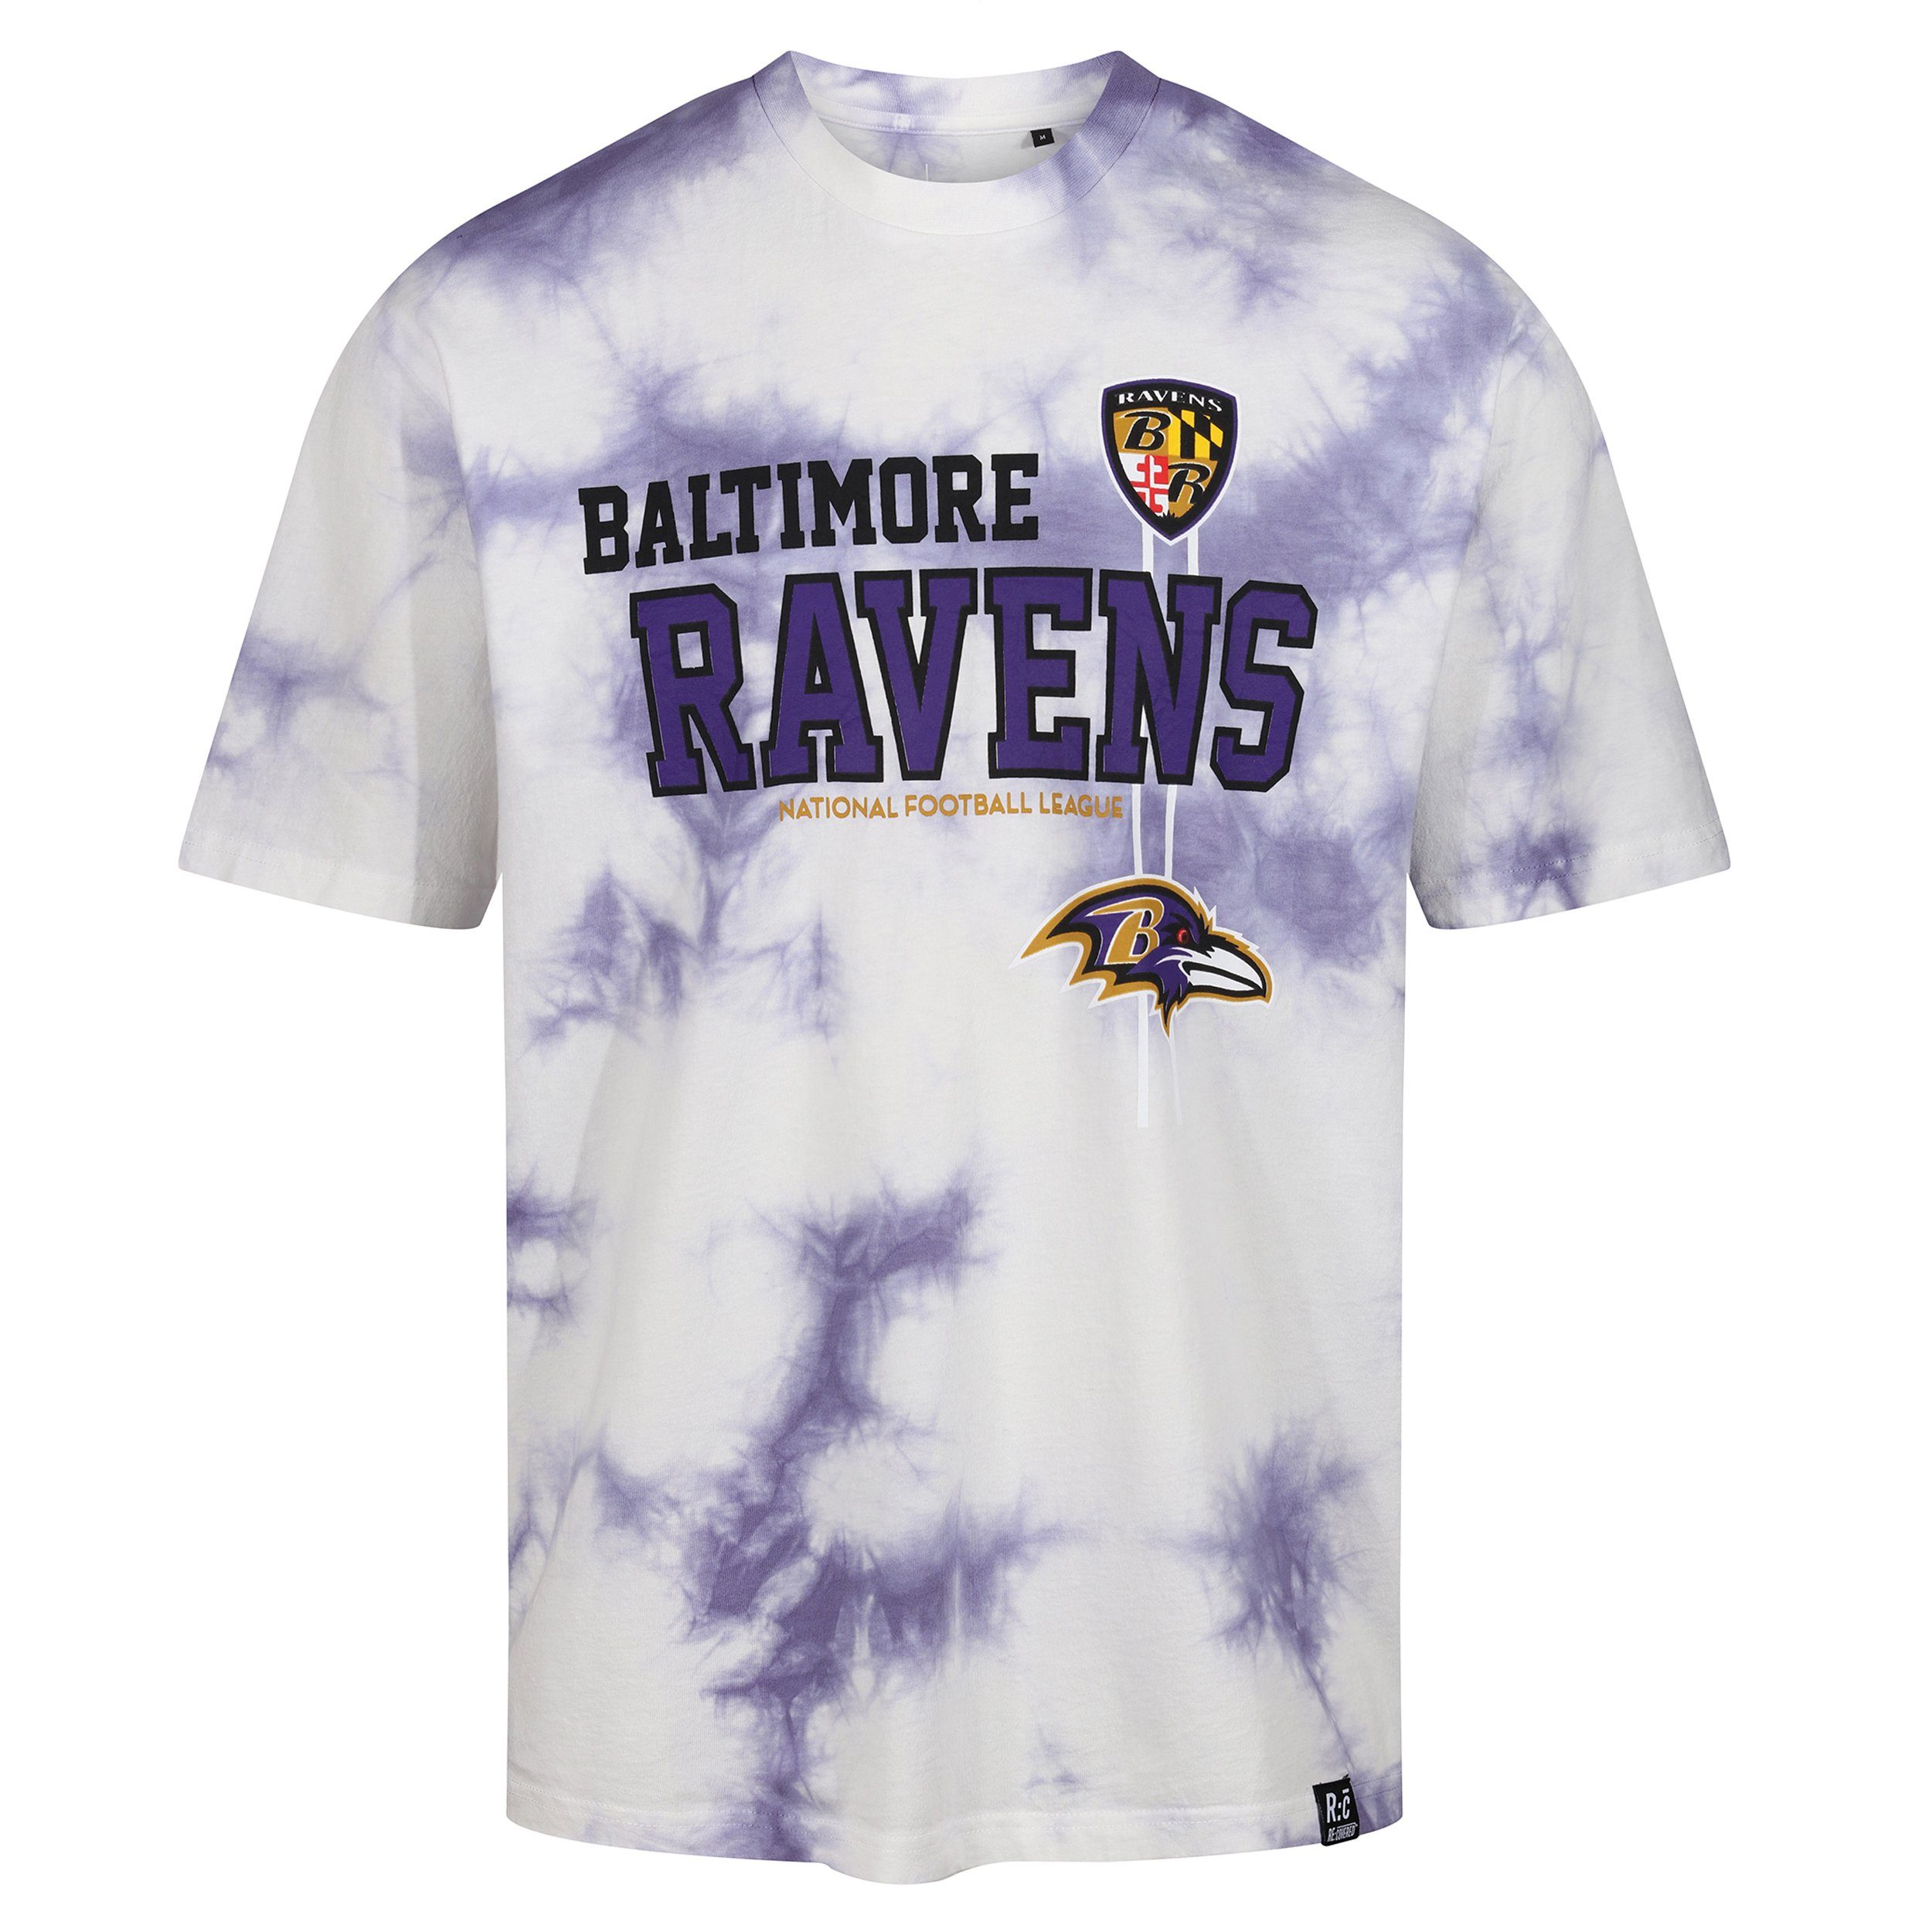 Recovered Print-Shirt Baltimore Ravens - NFL - Tie-Dye Relaxed T-Shirt, Badge Purple